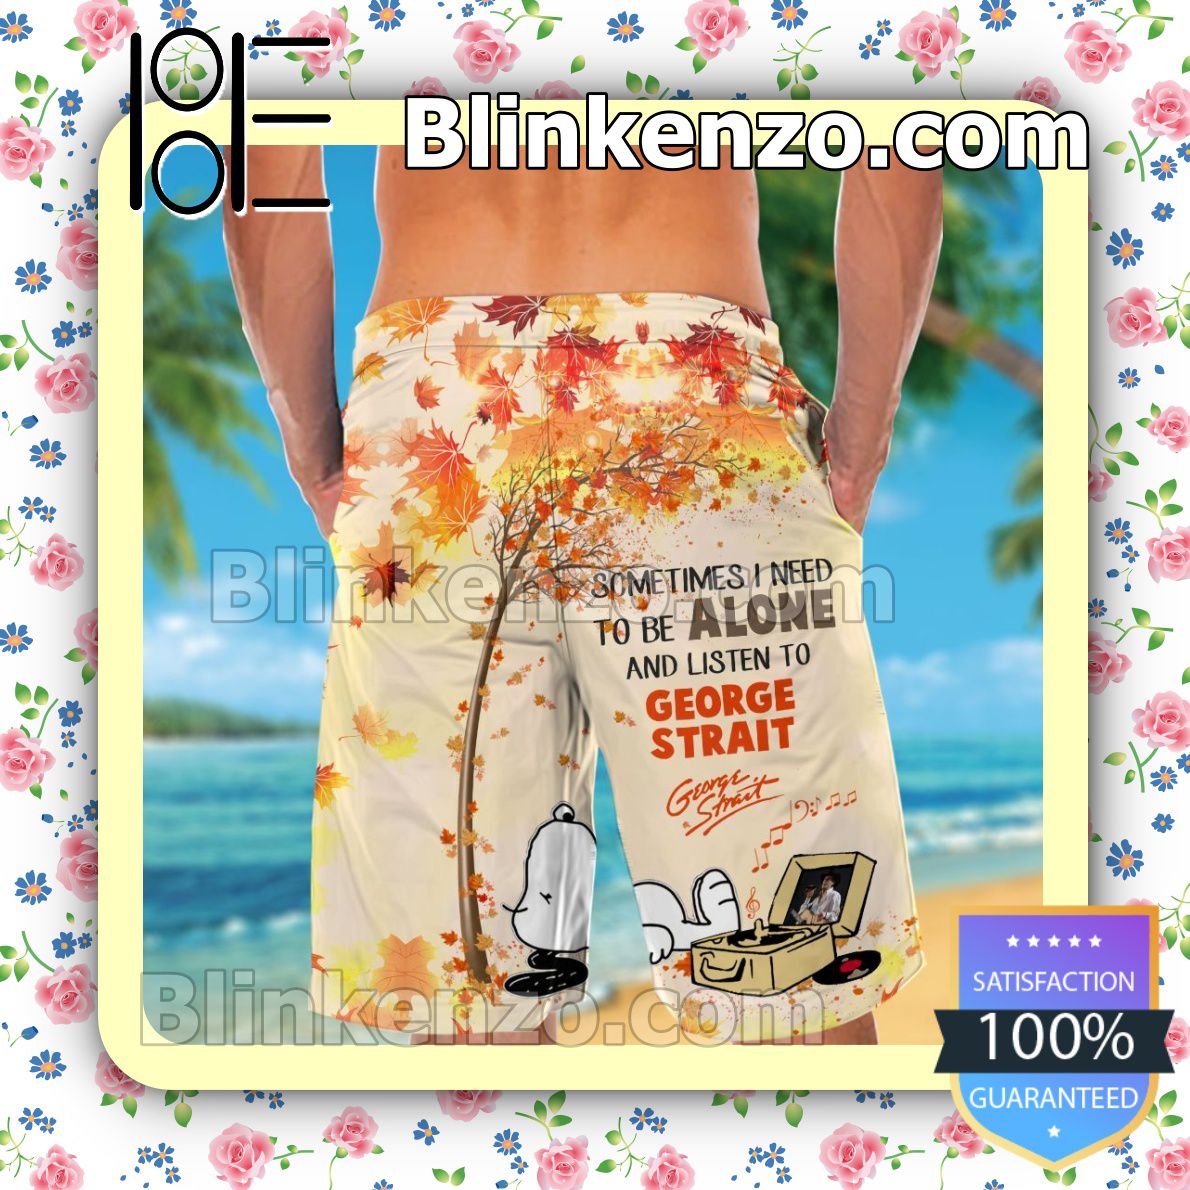 Print On Demand To Be Alone And Listen To George Strait Mens Shirt, Swim Trunk